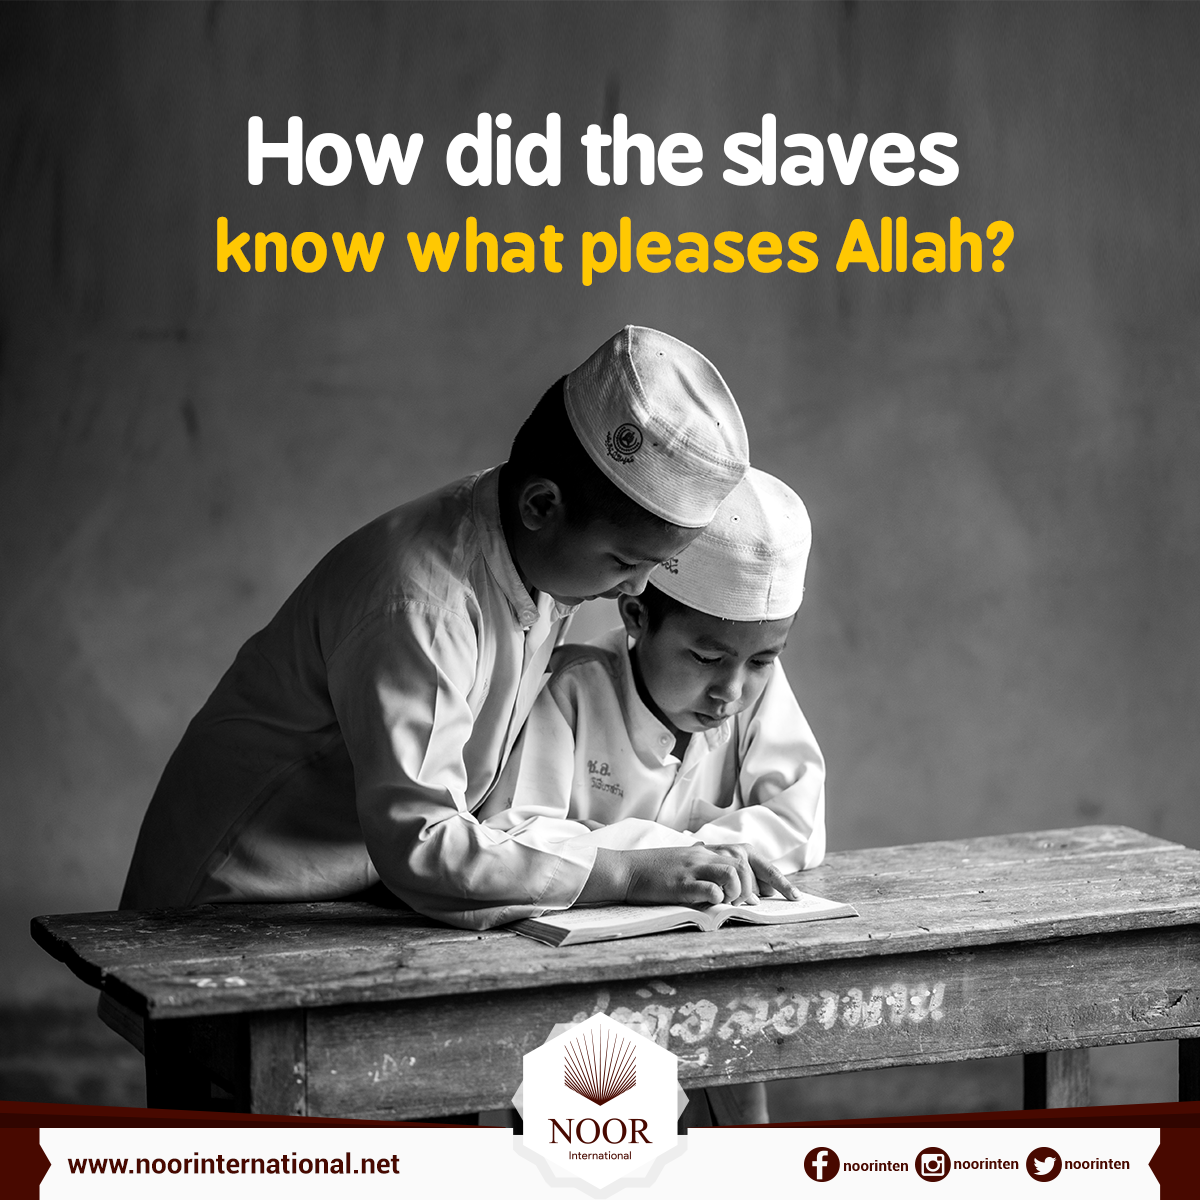 How did the slaves know what pleases Allah?